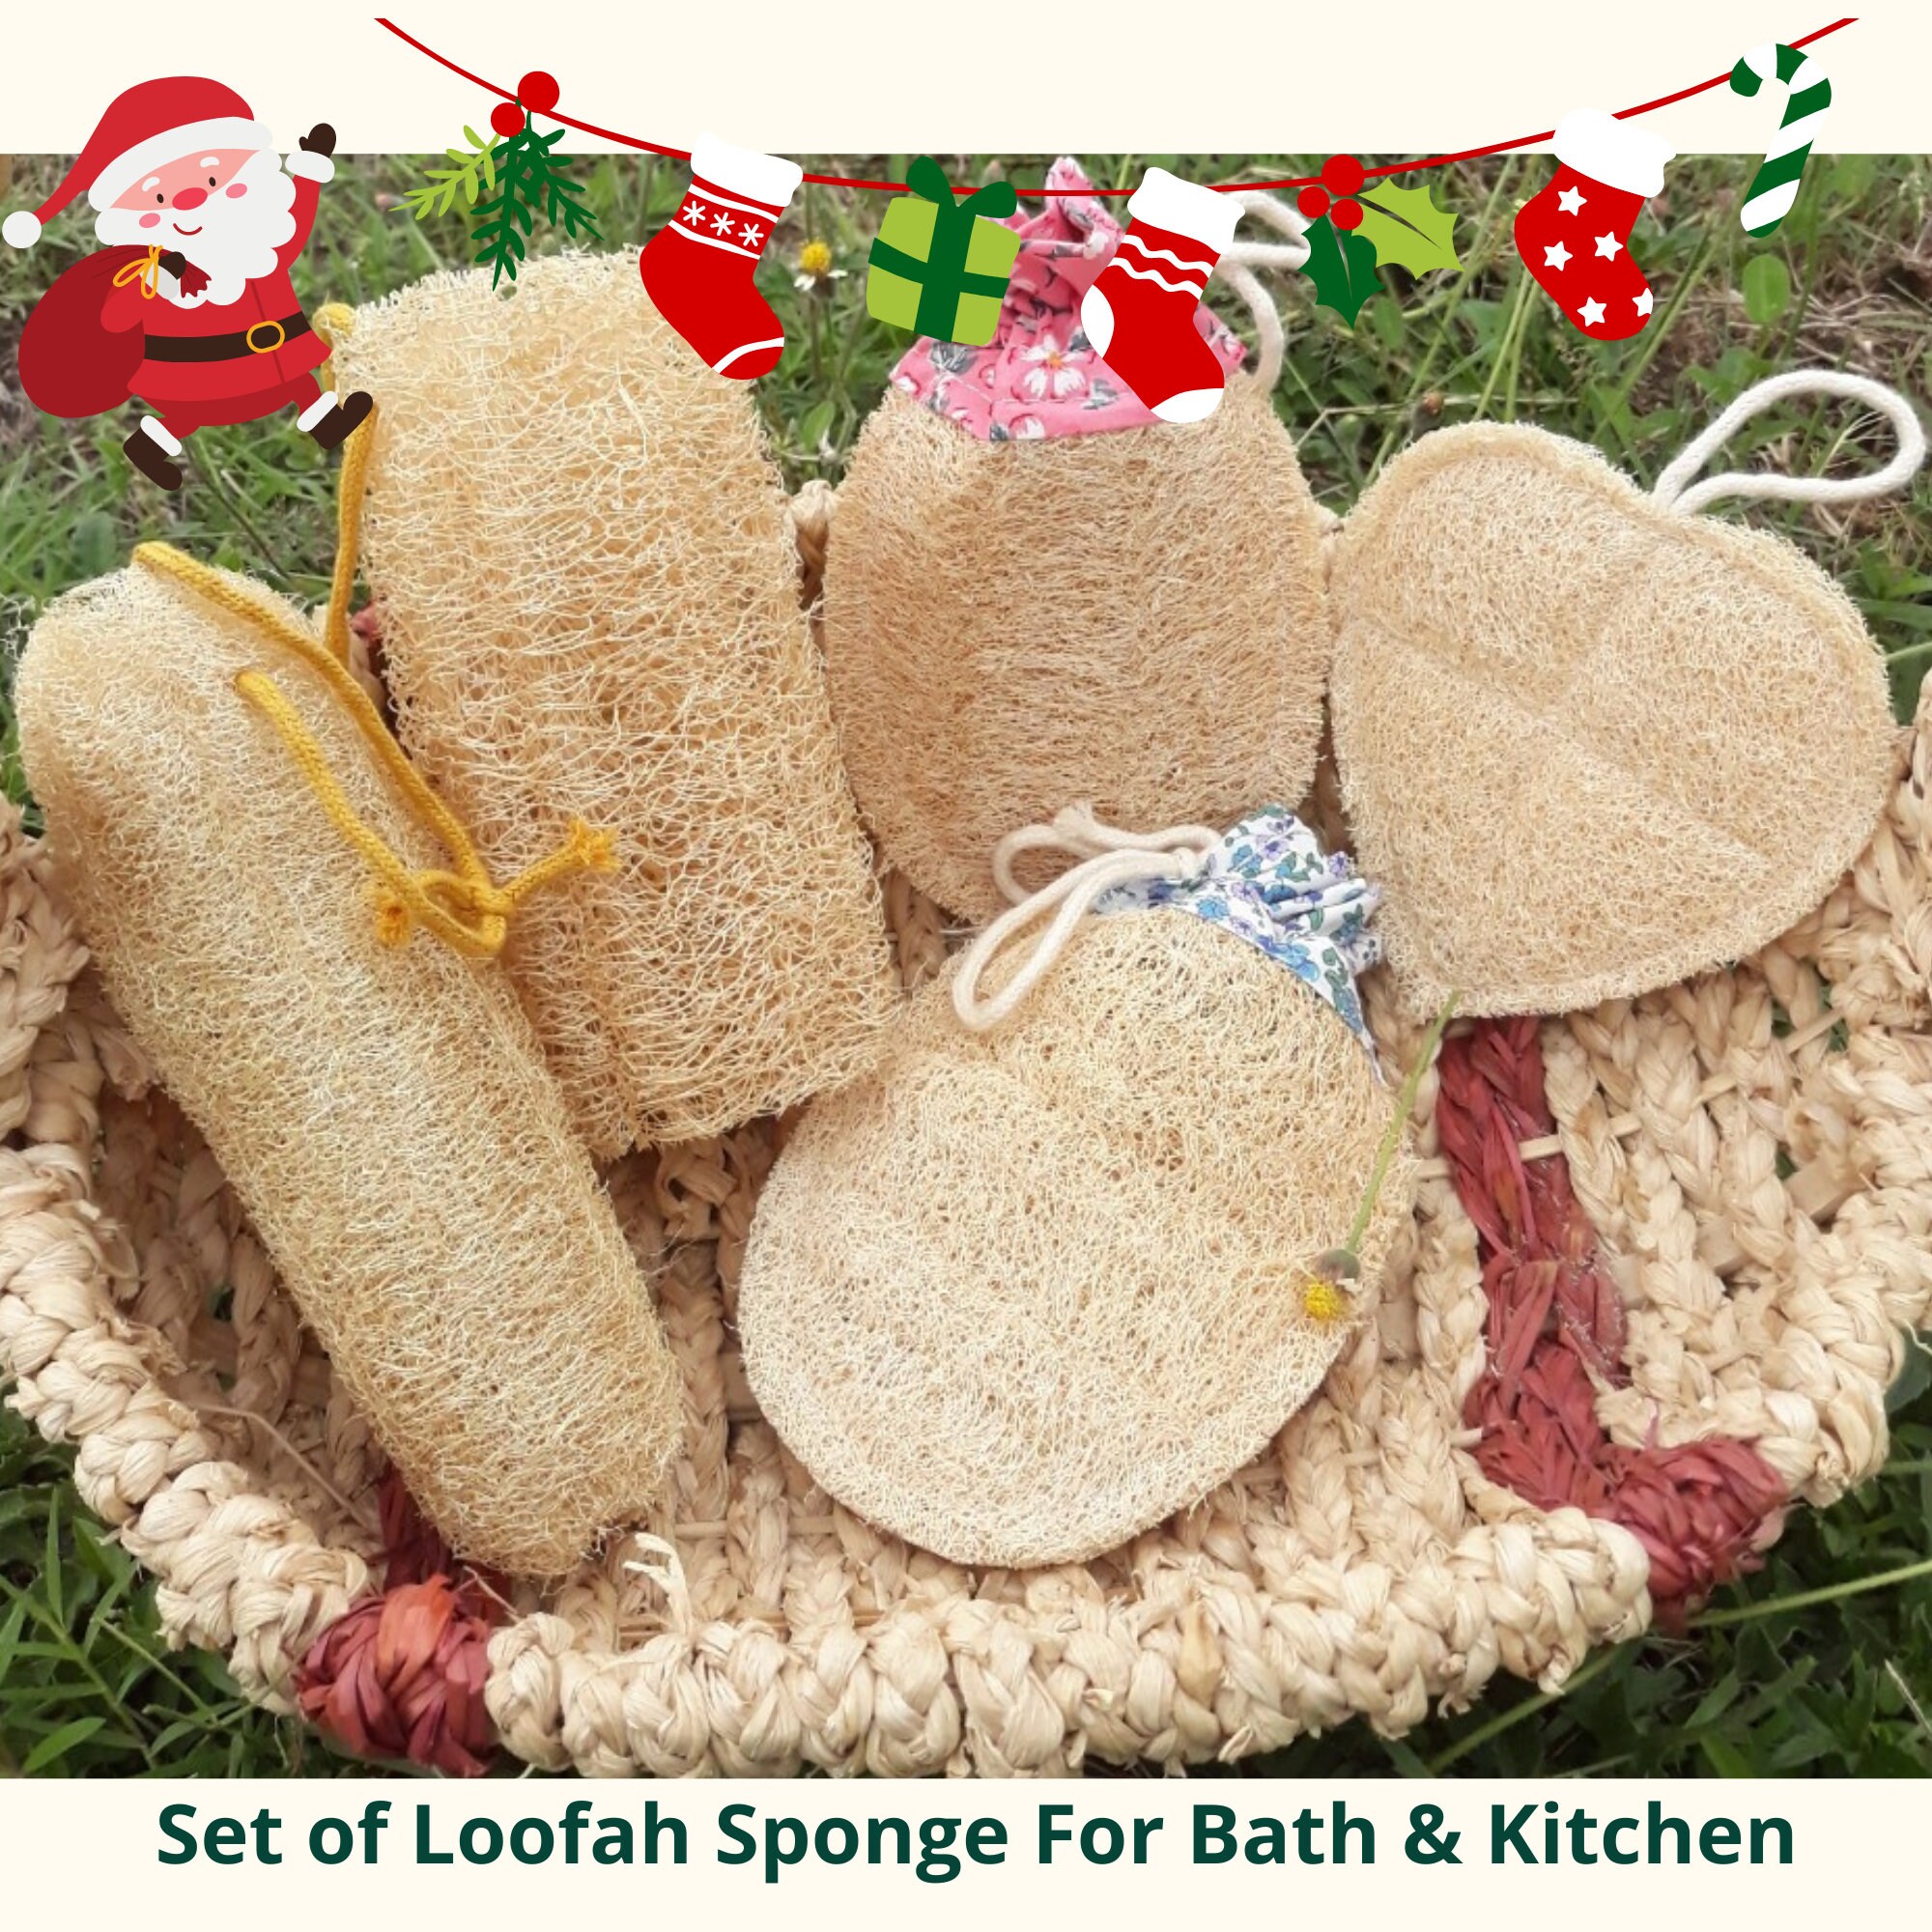 Natural Loofah Gift Set Including Body and Face Scrubbing Loofah